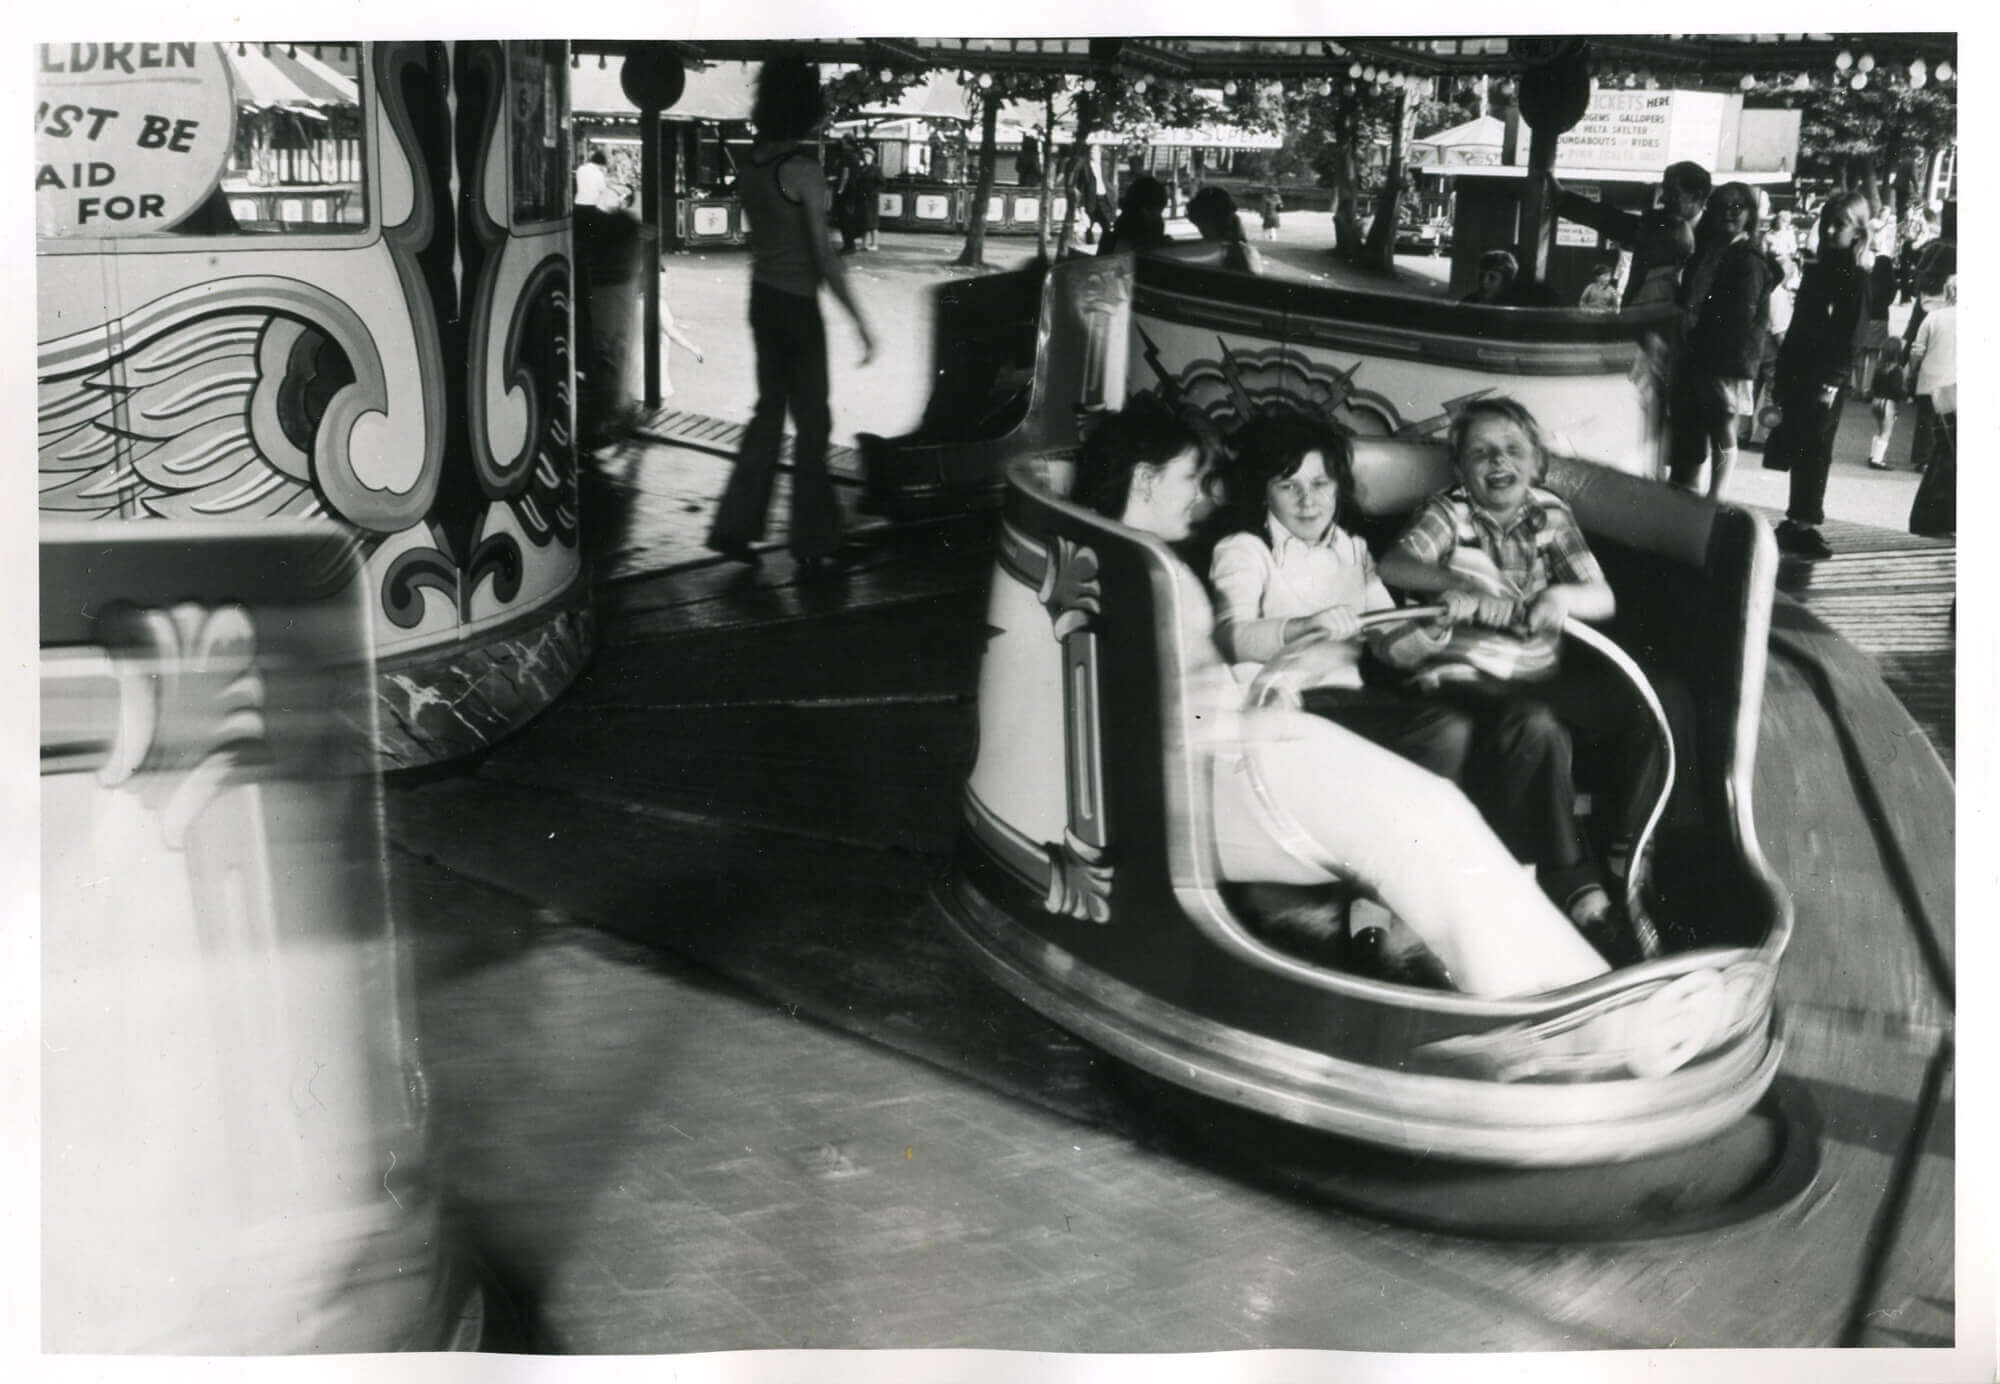 ￼PICTURE: Children on rides in Drayton Manor, ca.1970, courtesy of Drayton Manor